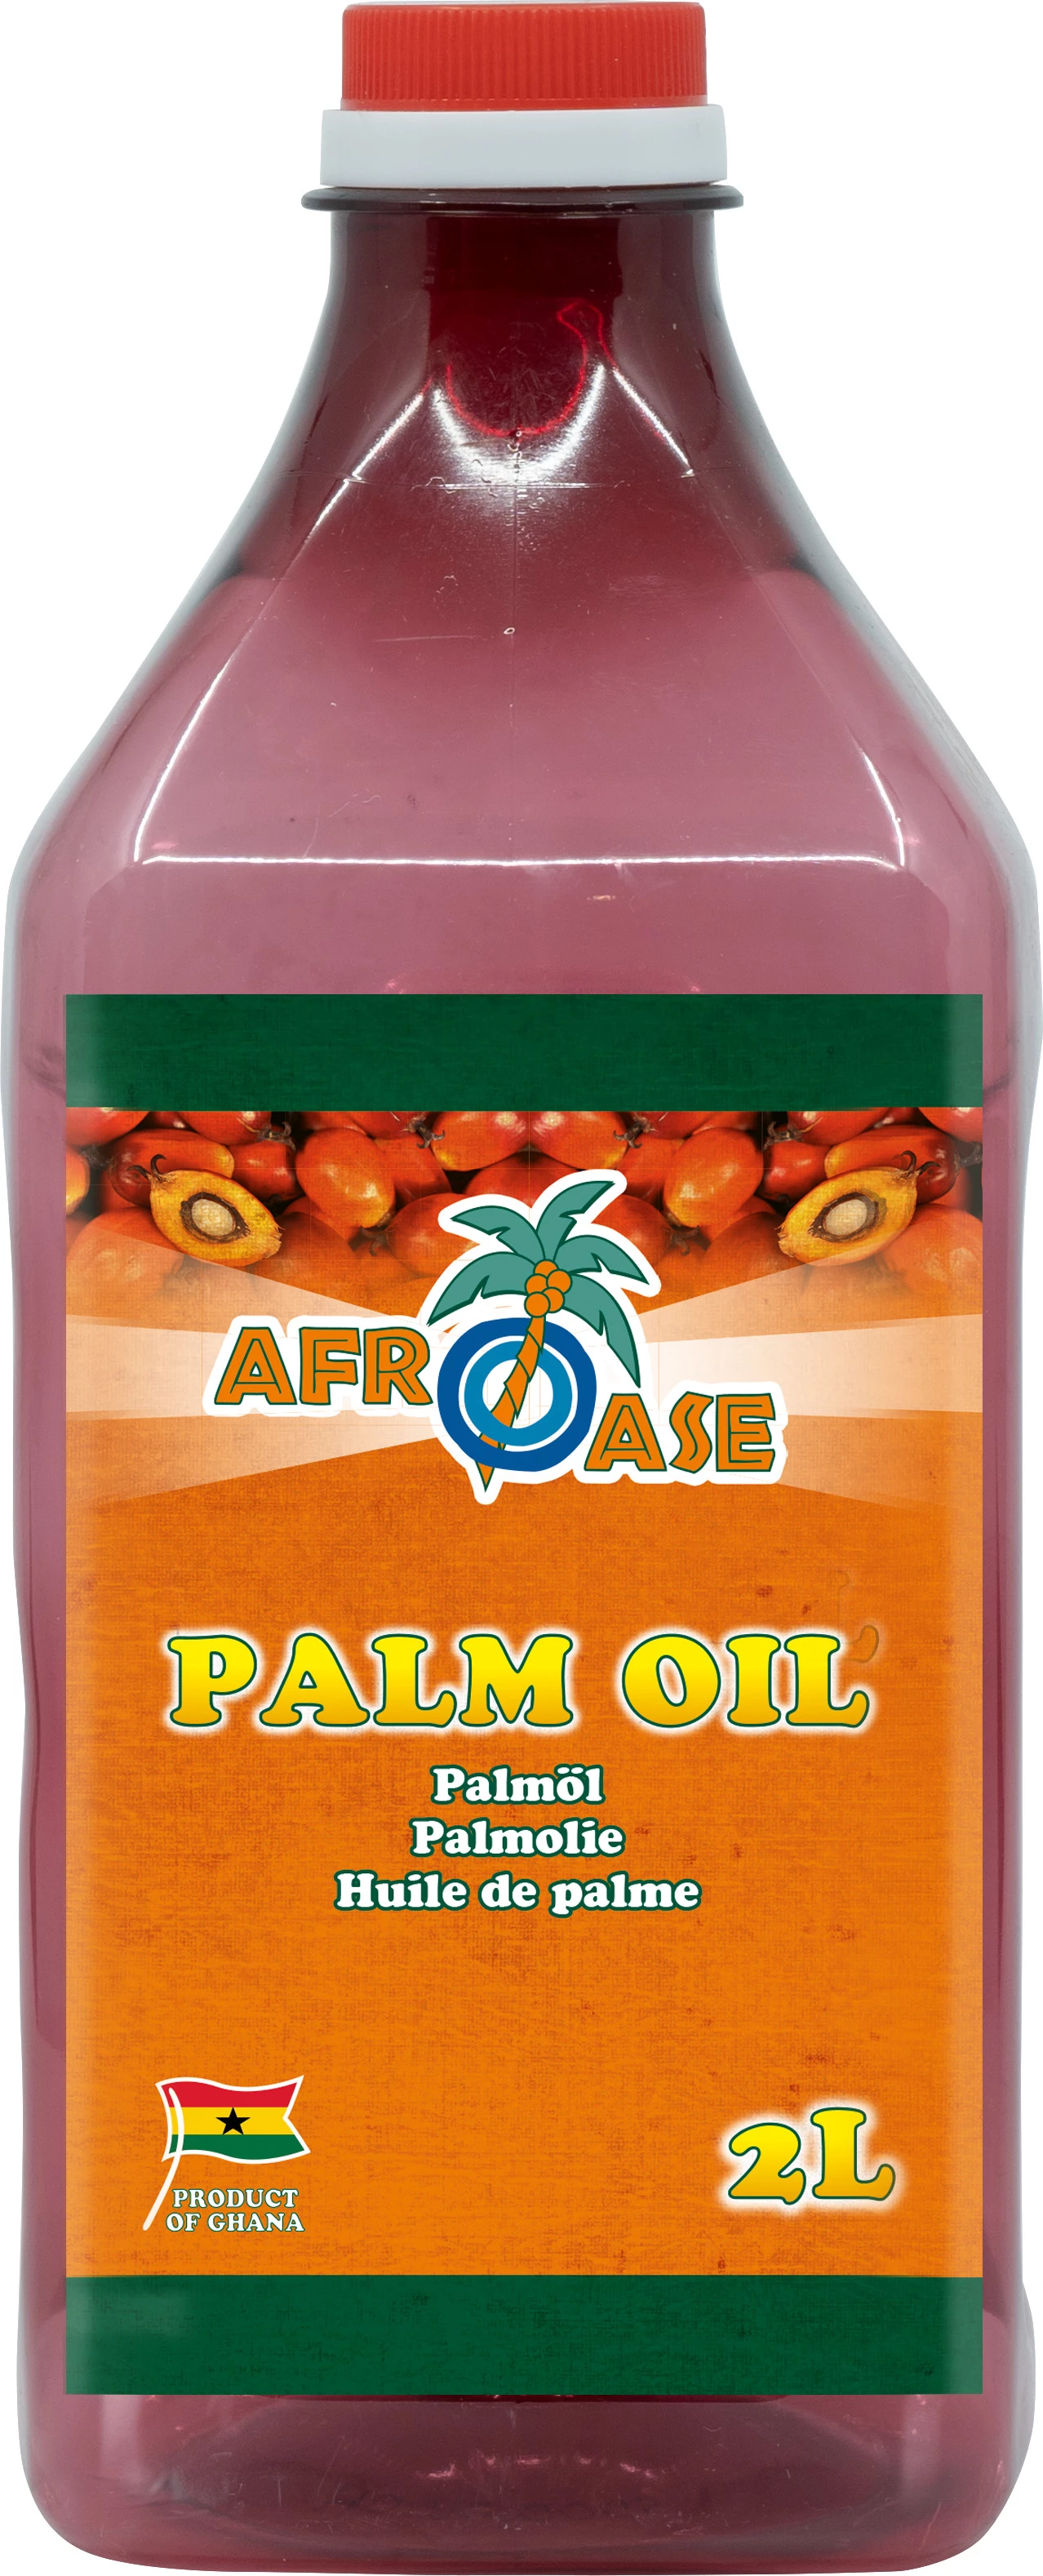 Palm Oil (classic) 6 X 2 Ltr - Afroase